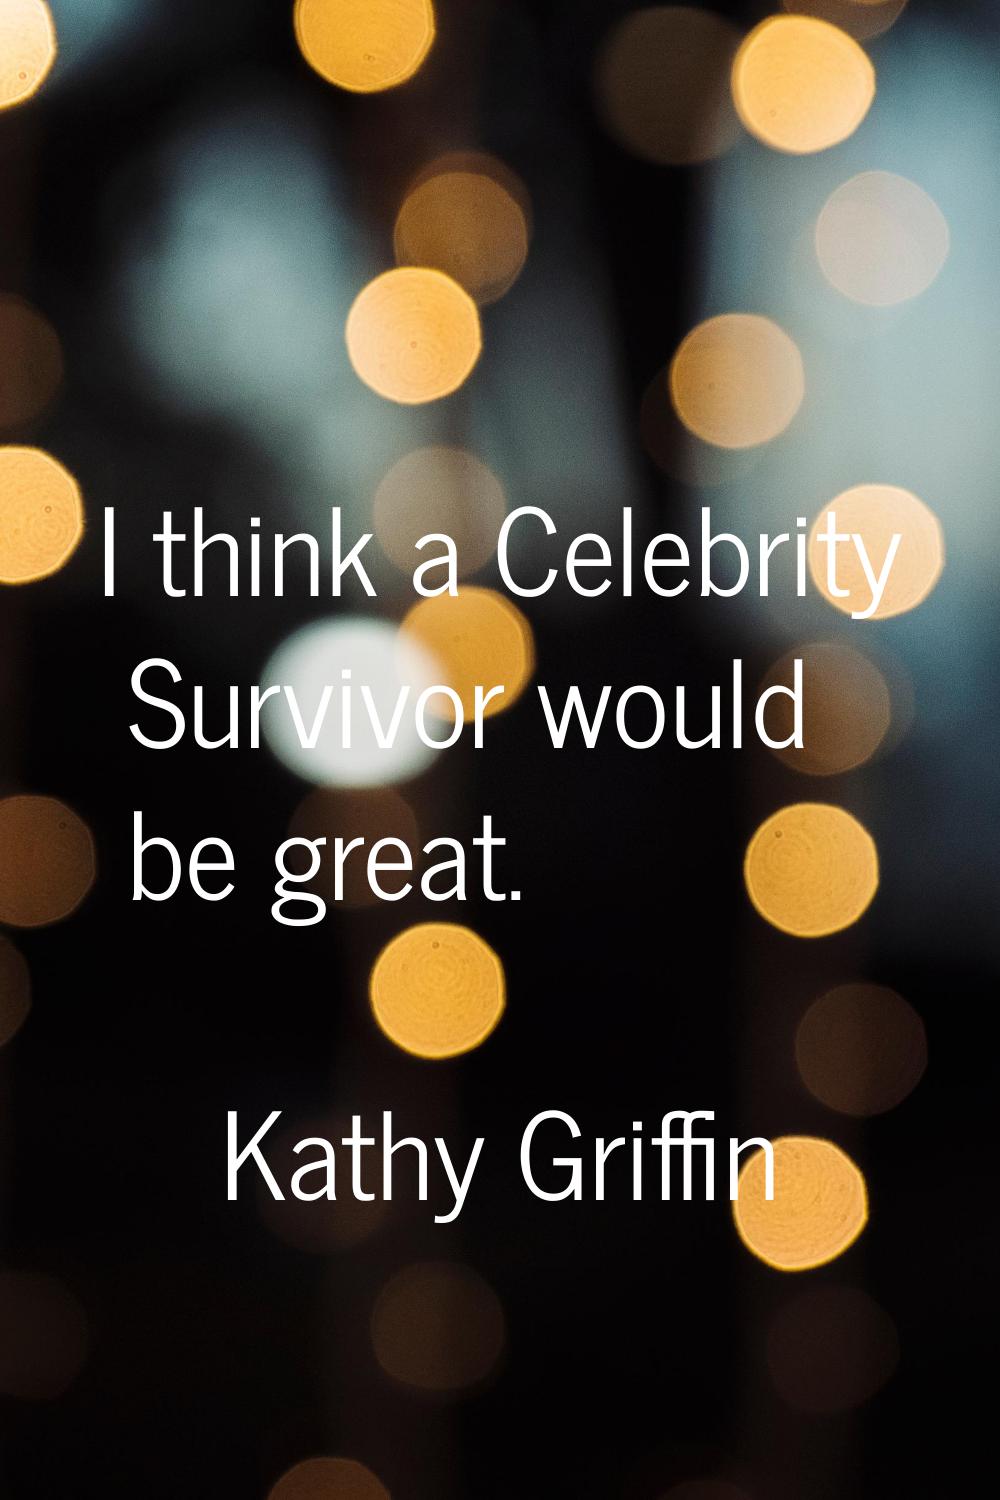 I think a Celebrity Survivor would be great.